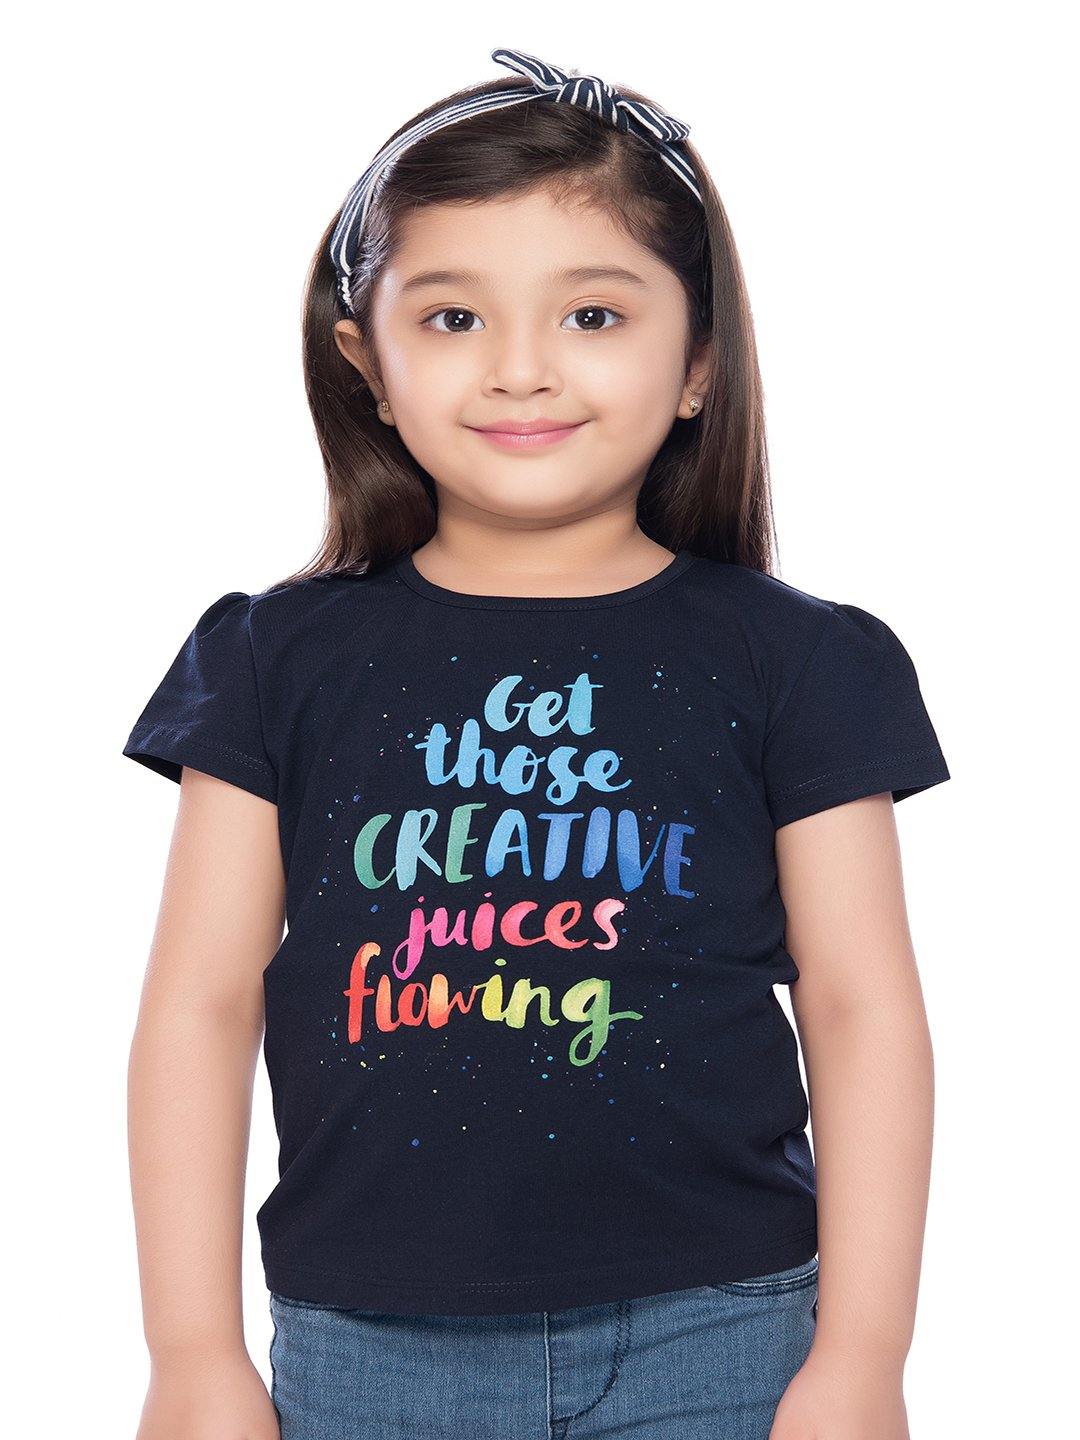 Tiny Baby Navy Blue Colored Top - T-105 Navy Blue - TINY BABY INDIA shop.tinybaby.in